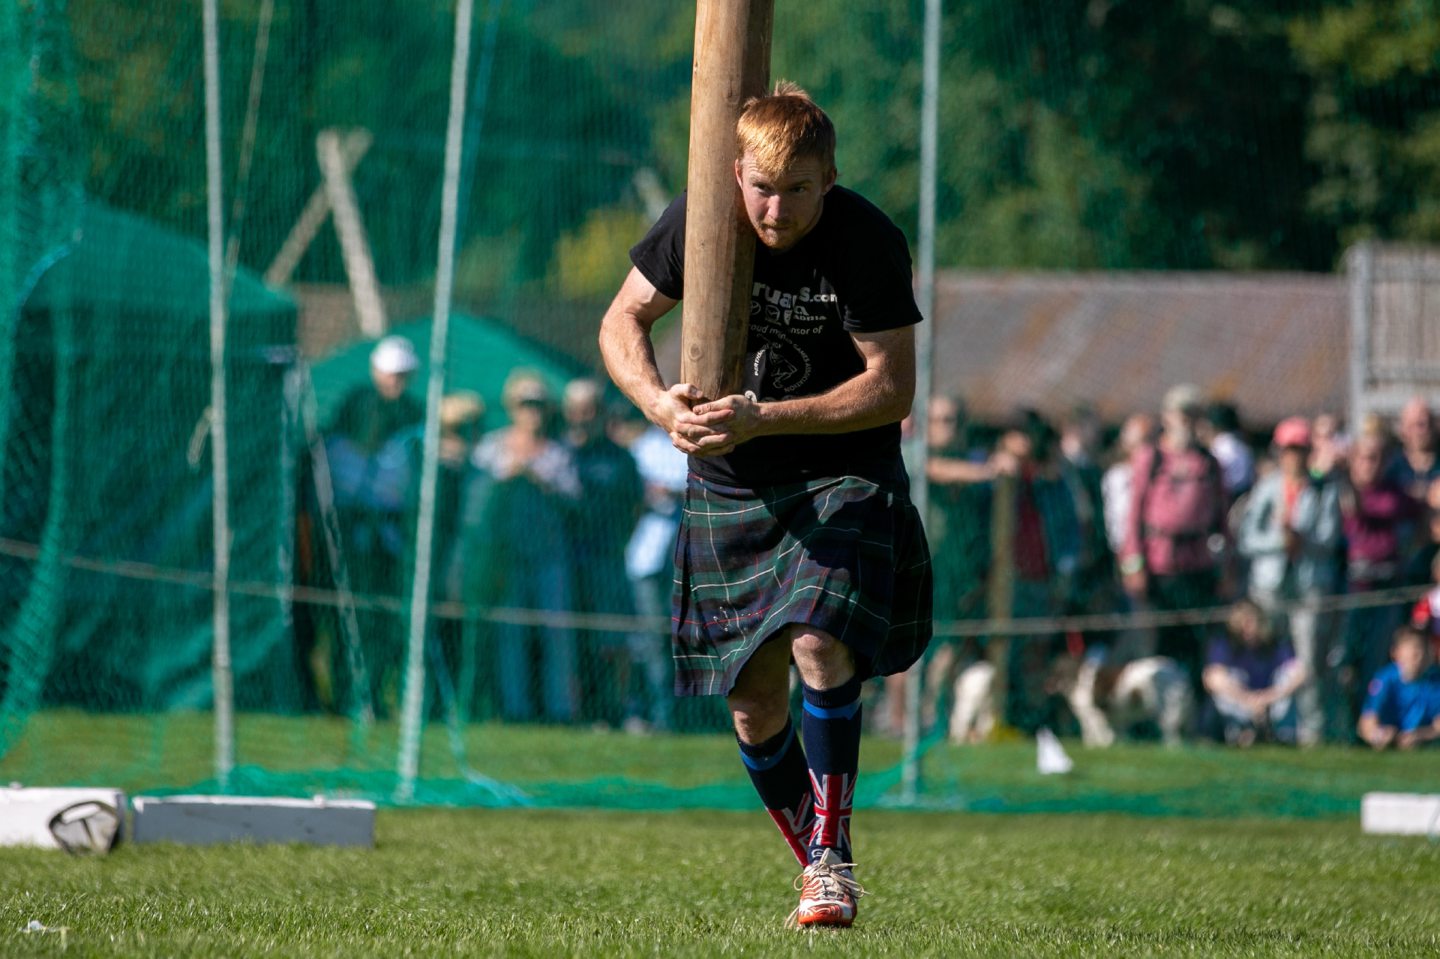 David Colthart Jr takes part in the caber toss event at Pitlochry Highland Games.